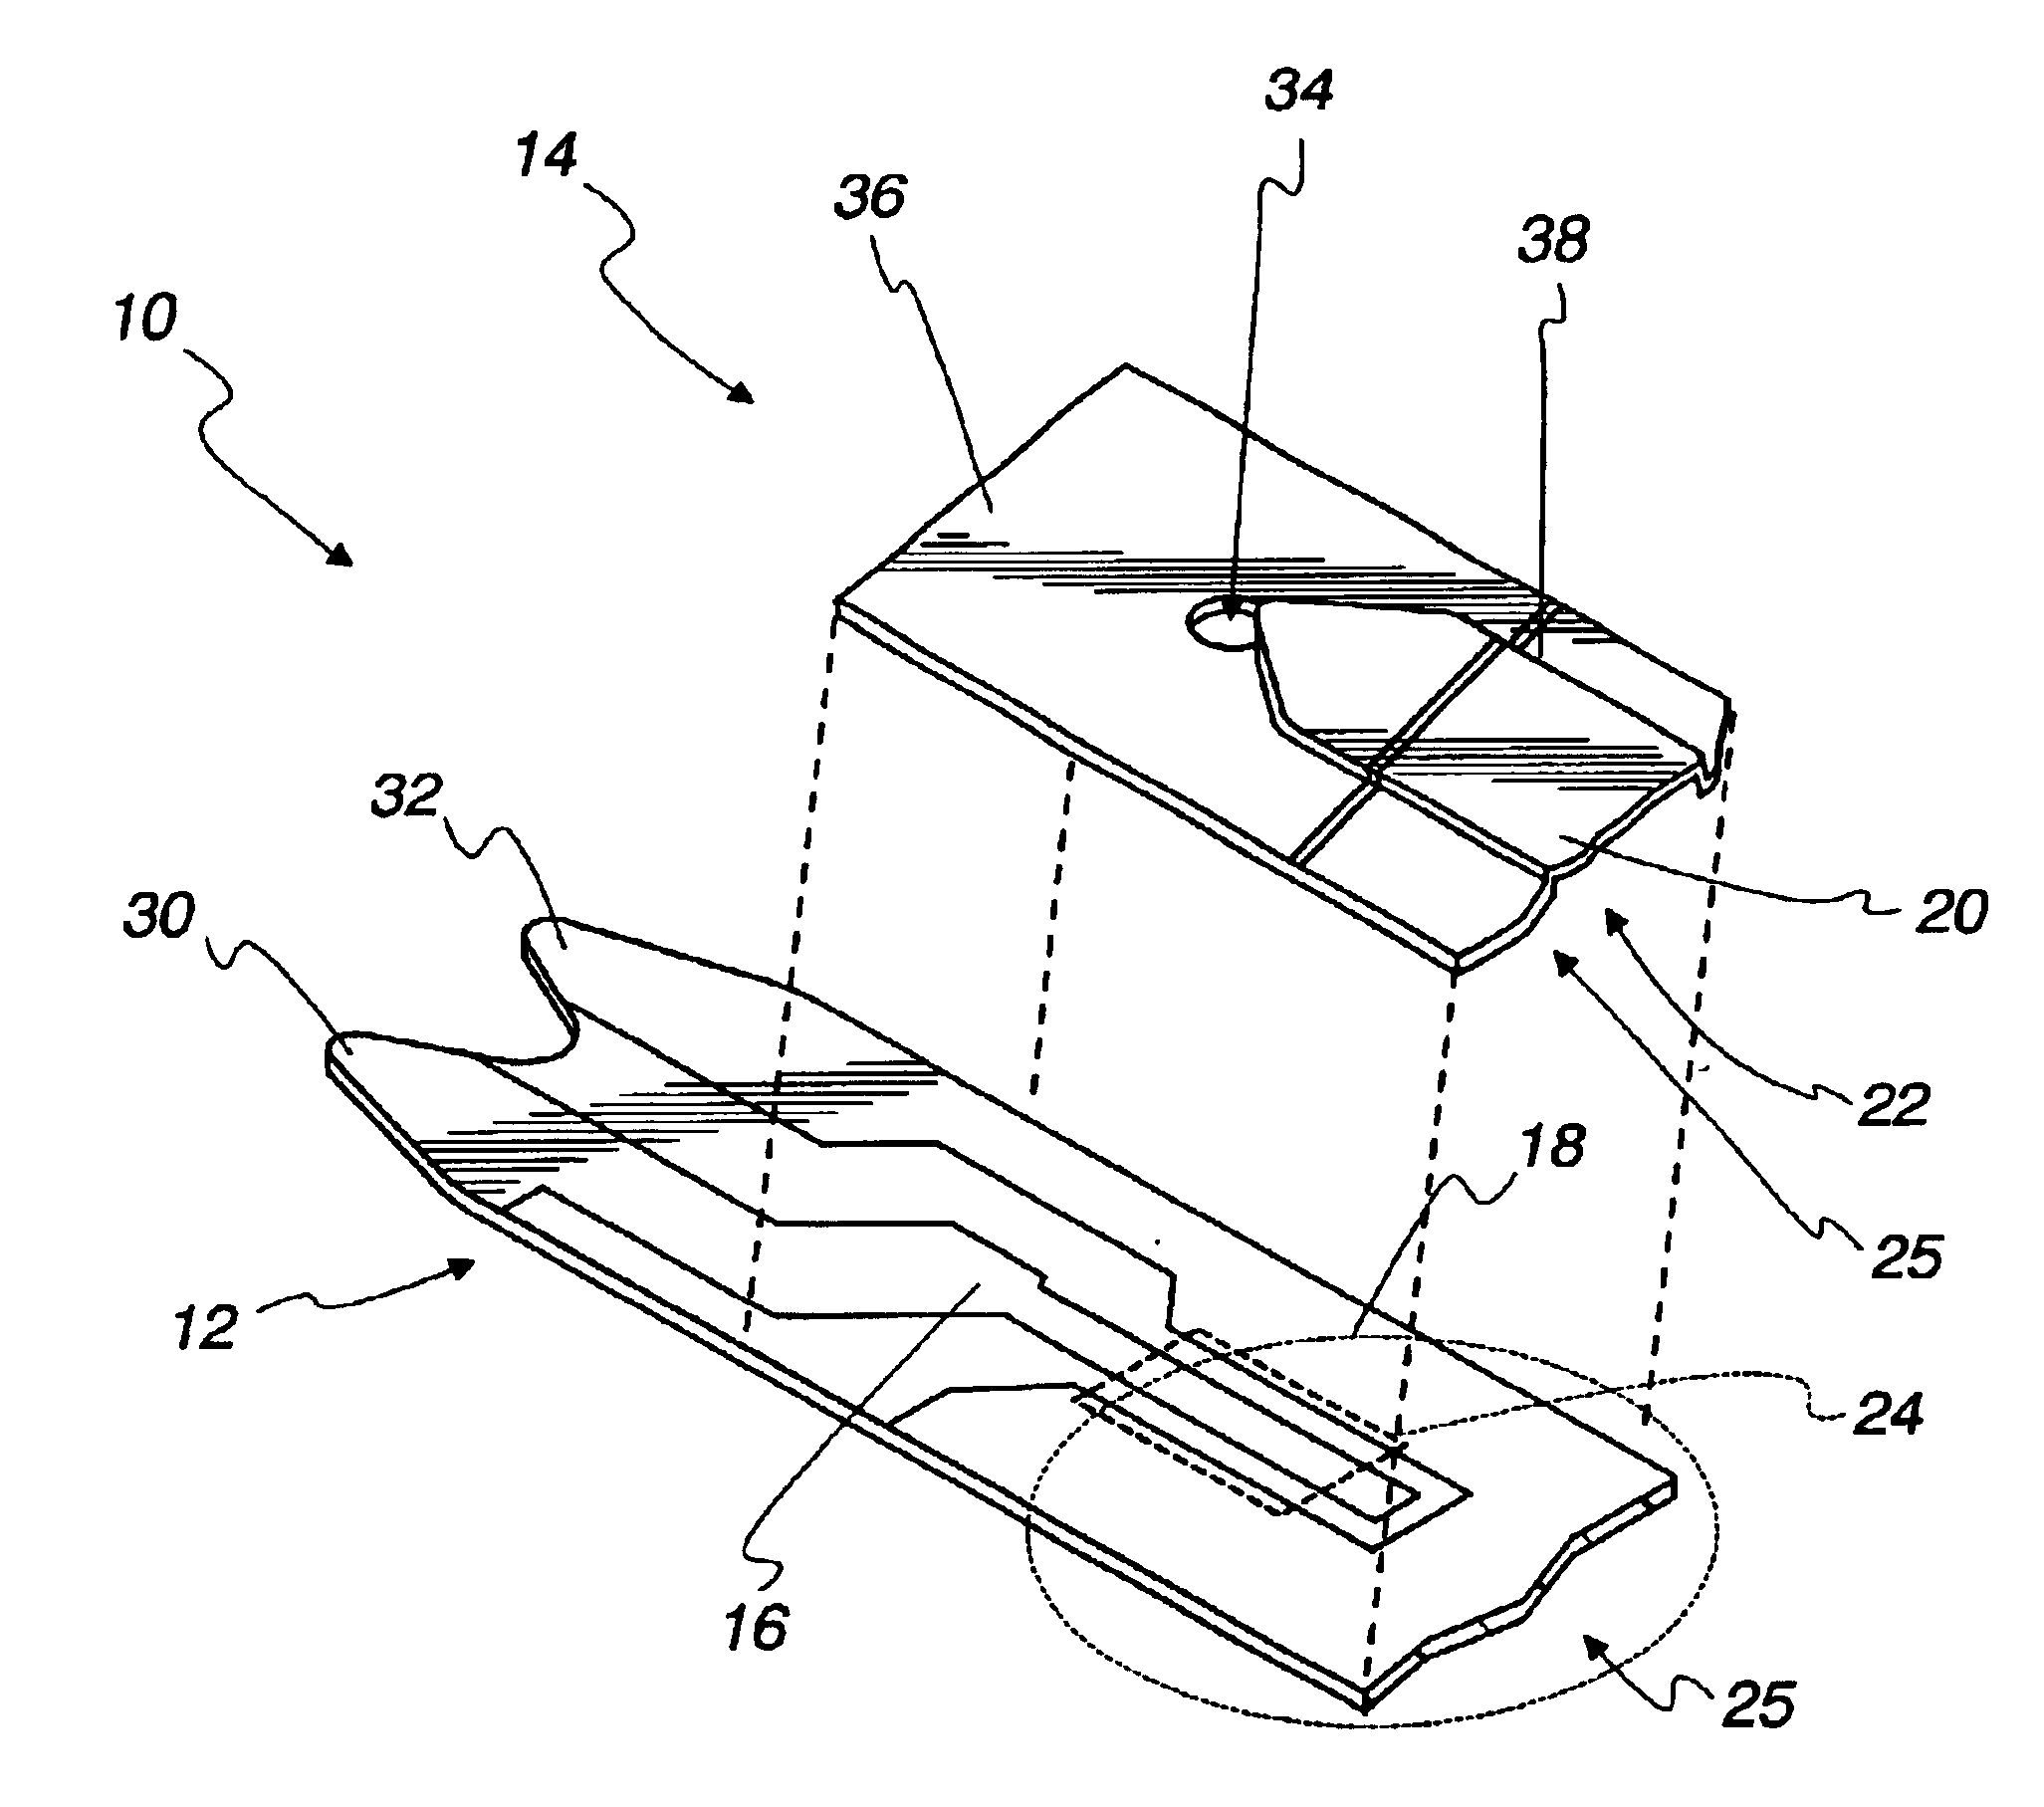 Underfill detection system for a test sensor